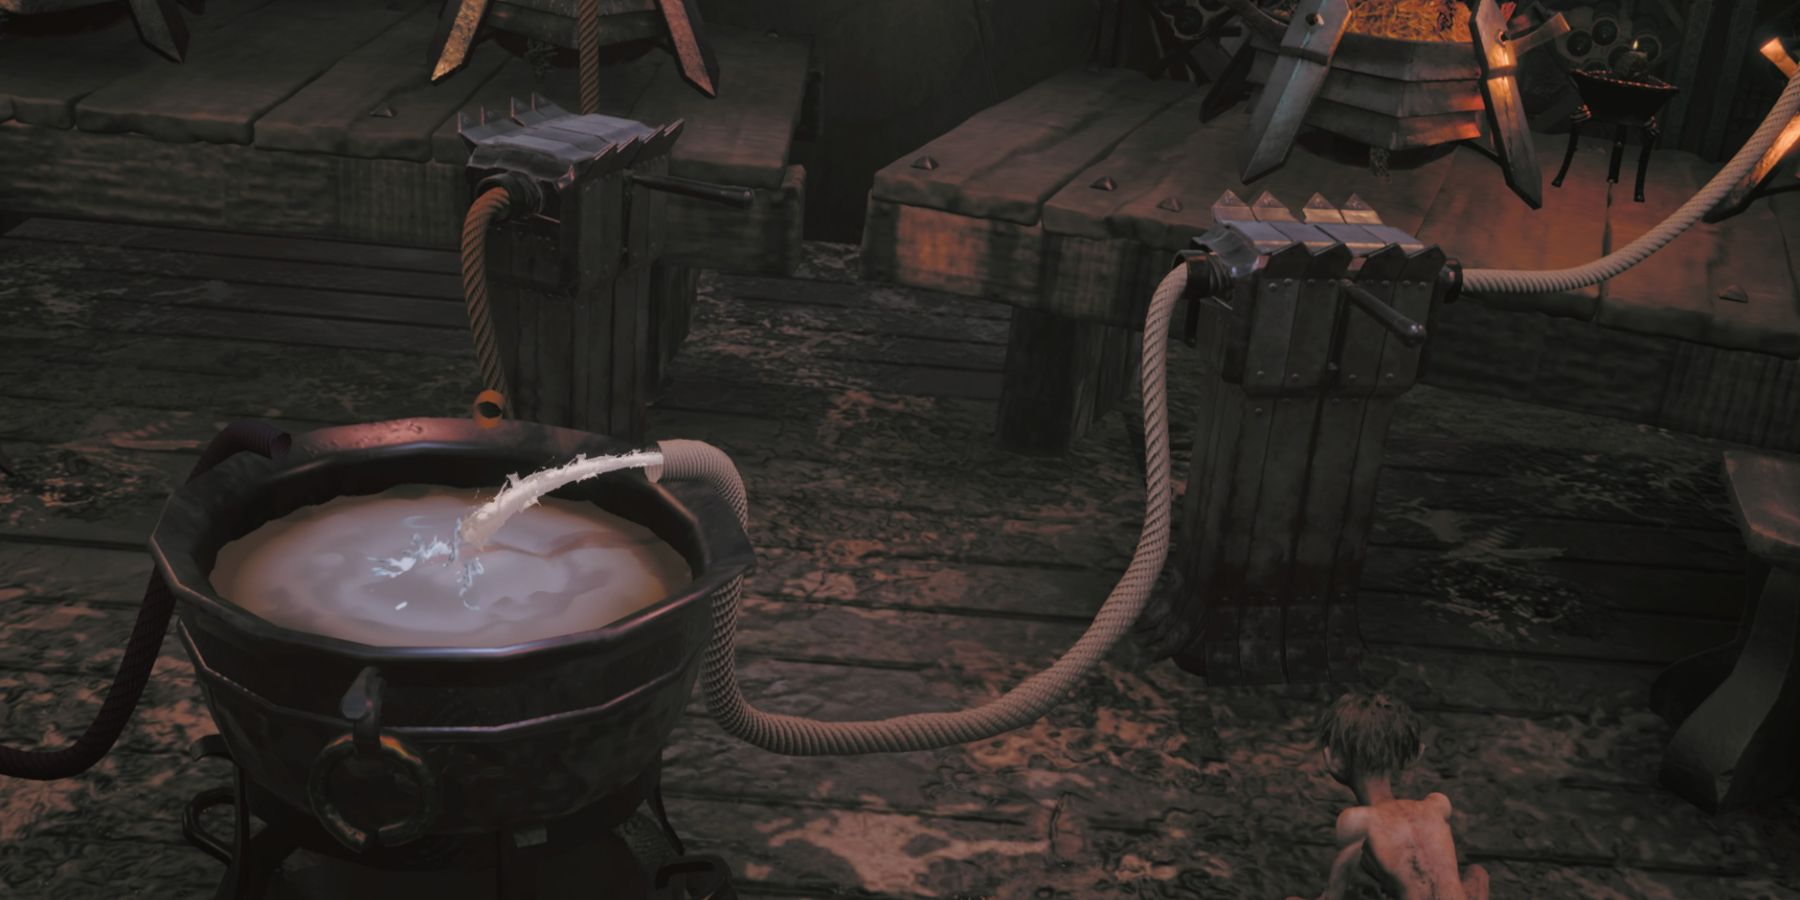 In The Lord of the Rings: Gollum, white liquid pours into a cauldron